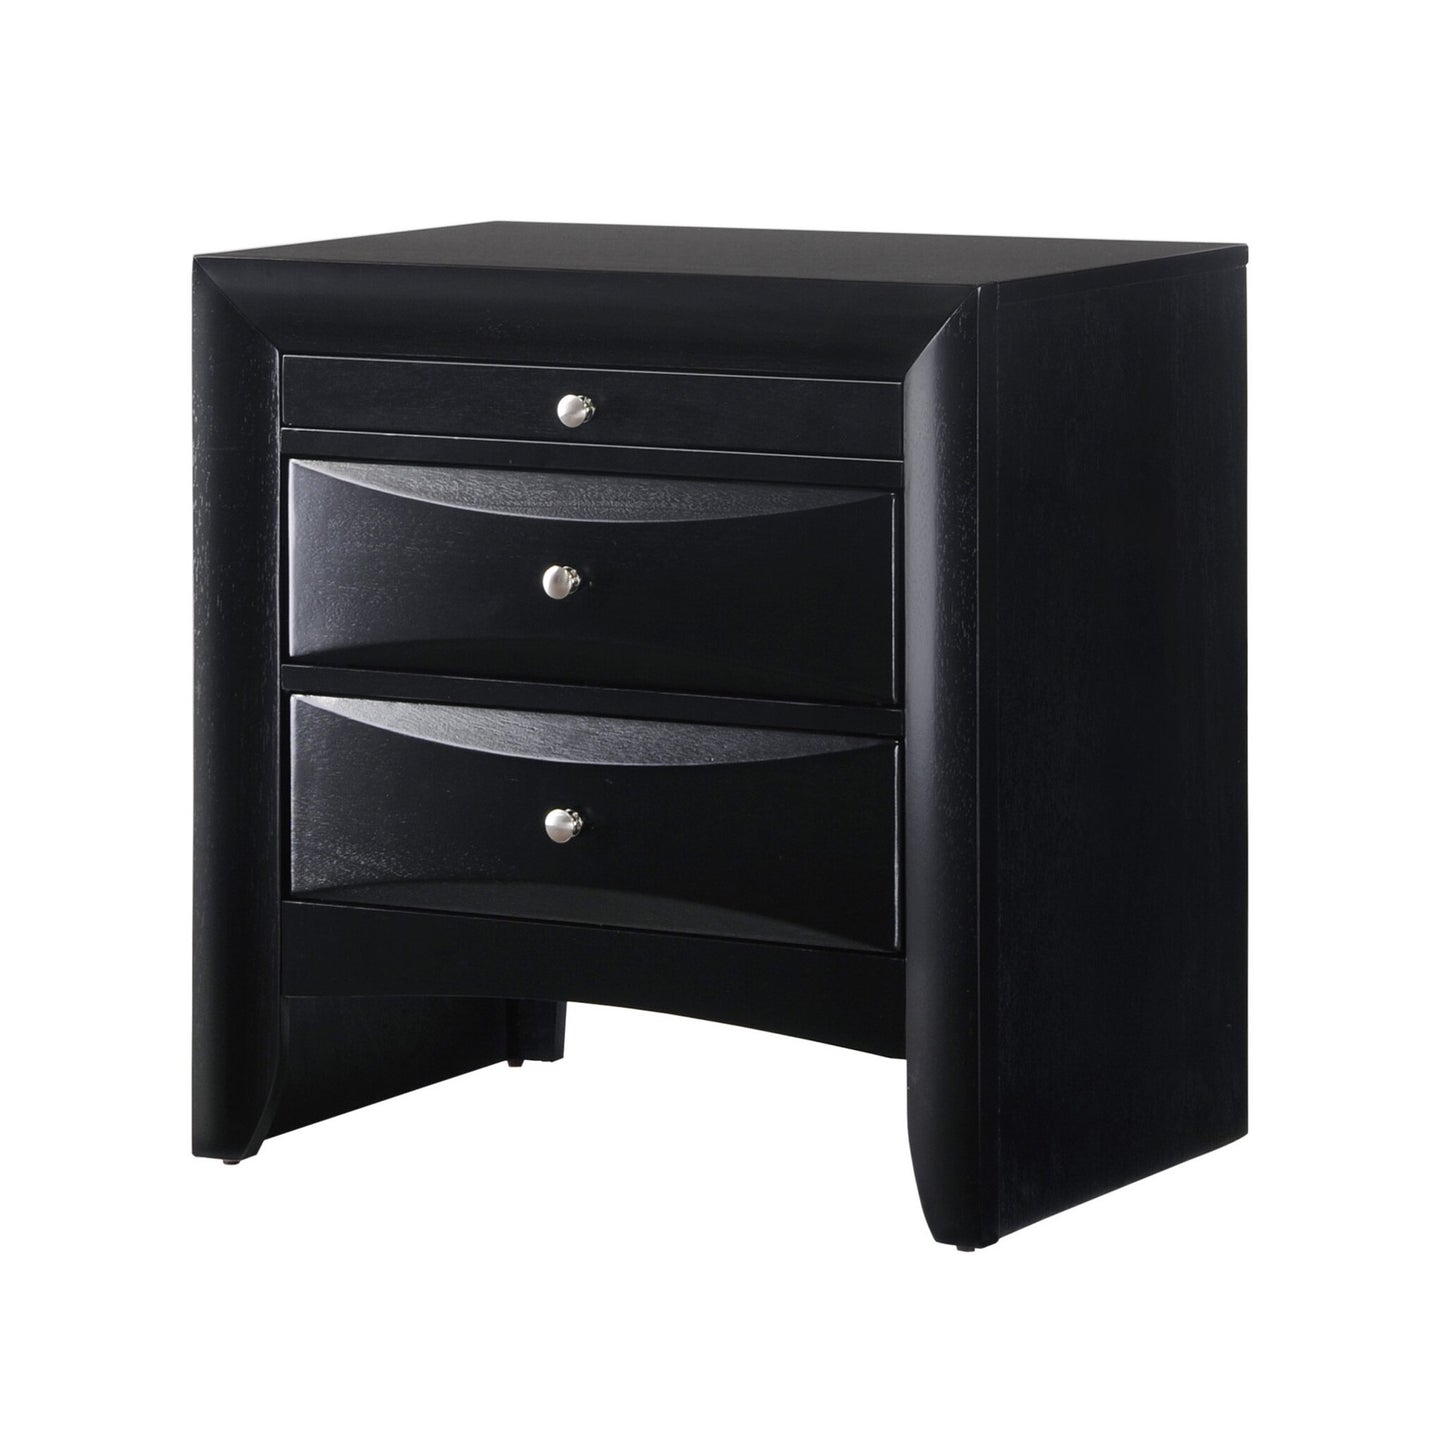 Contemporary Style Nightstand End Table 1Pc Black Finish Wood Veneers & Solids 2 Storage Drawers